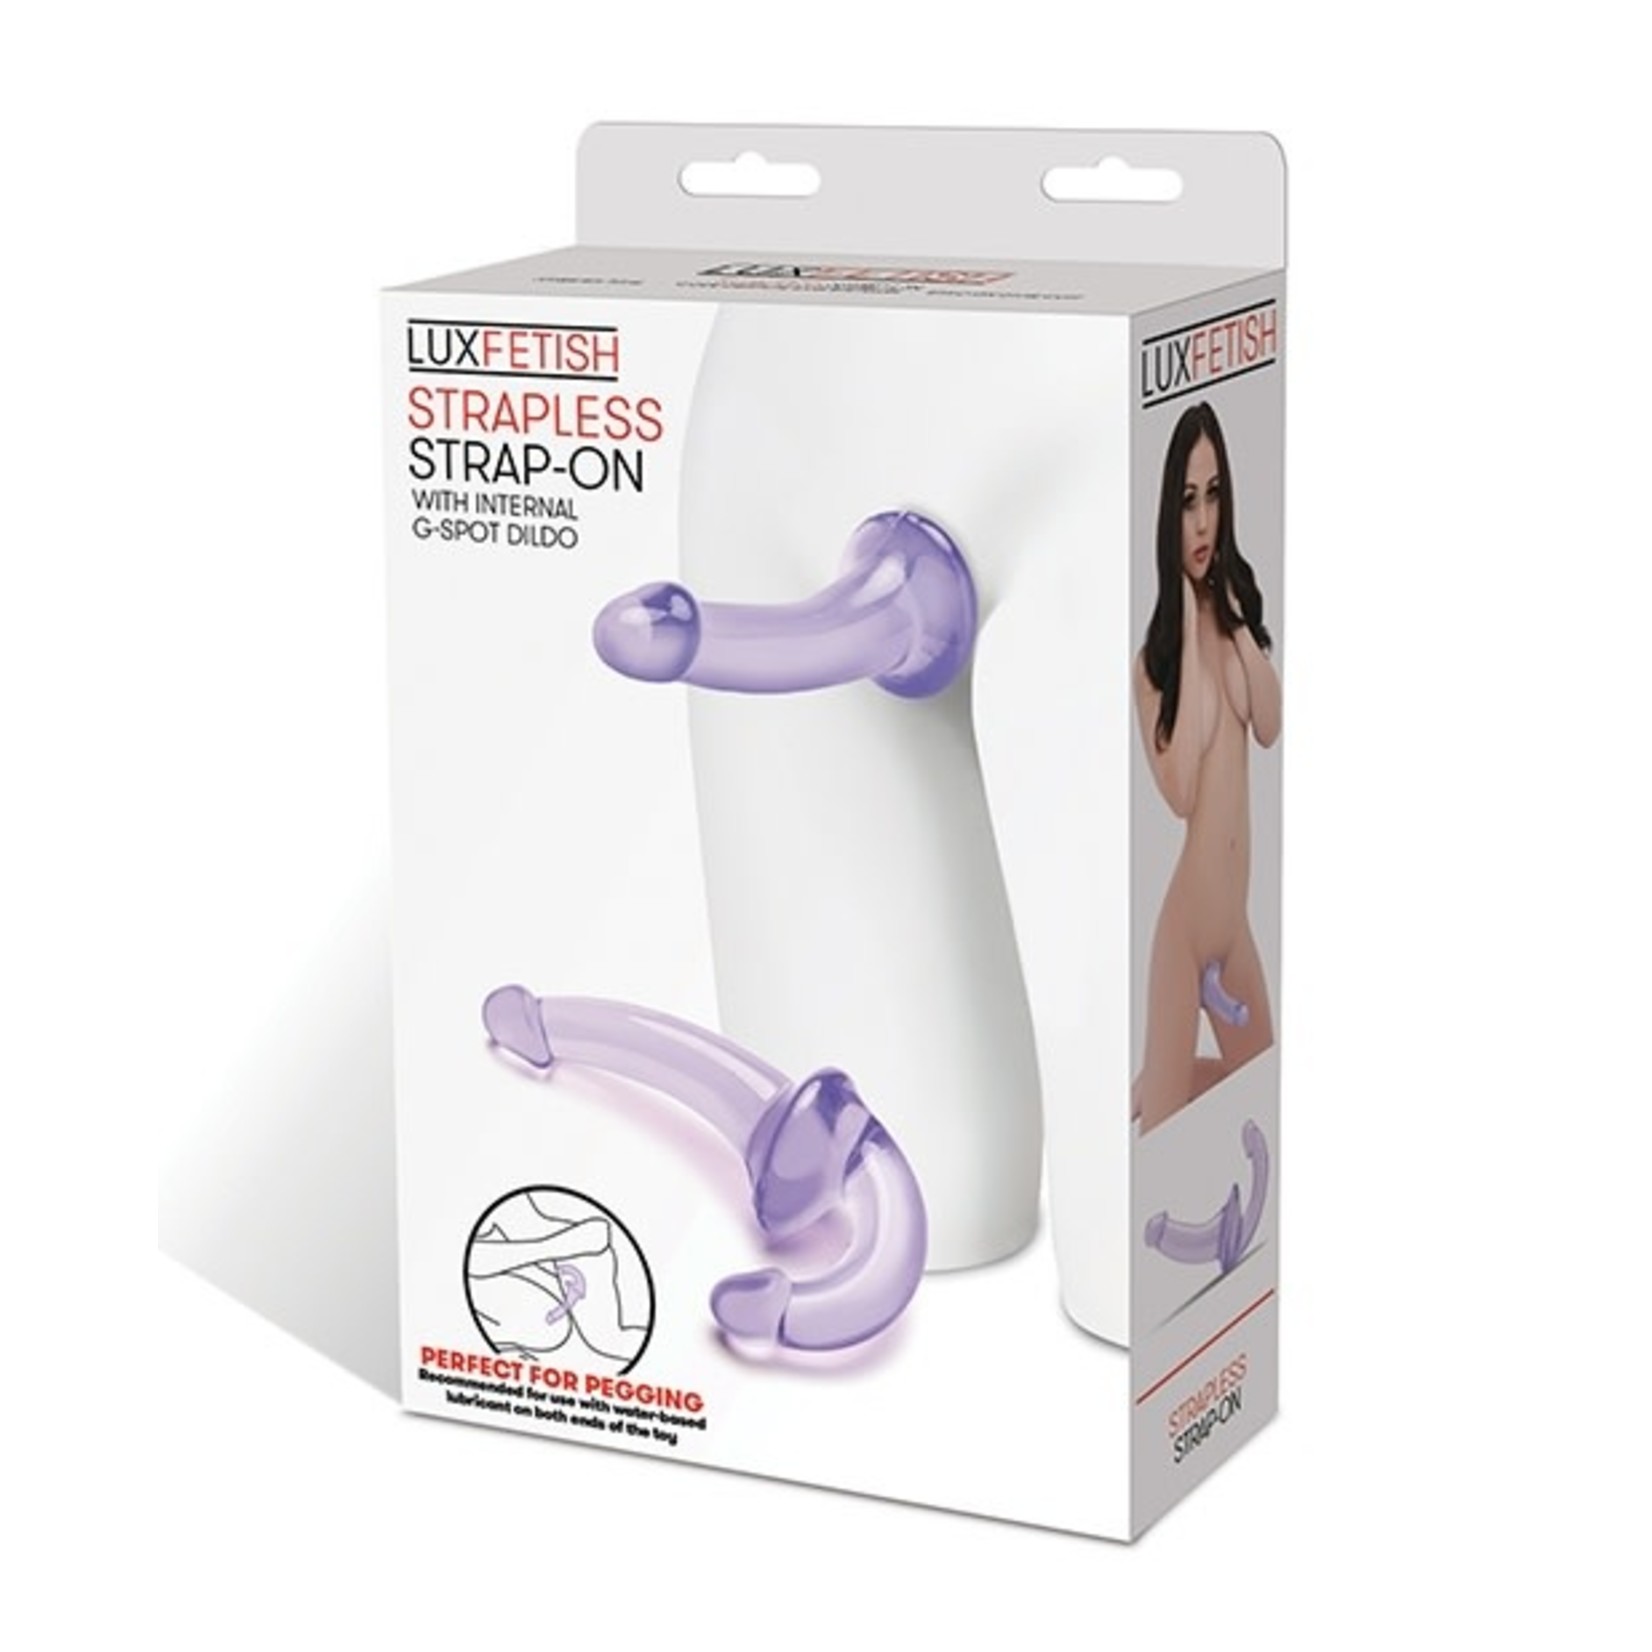 STRAPLESS STRAP-ON WEARABLE JELLY DILDO